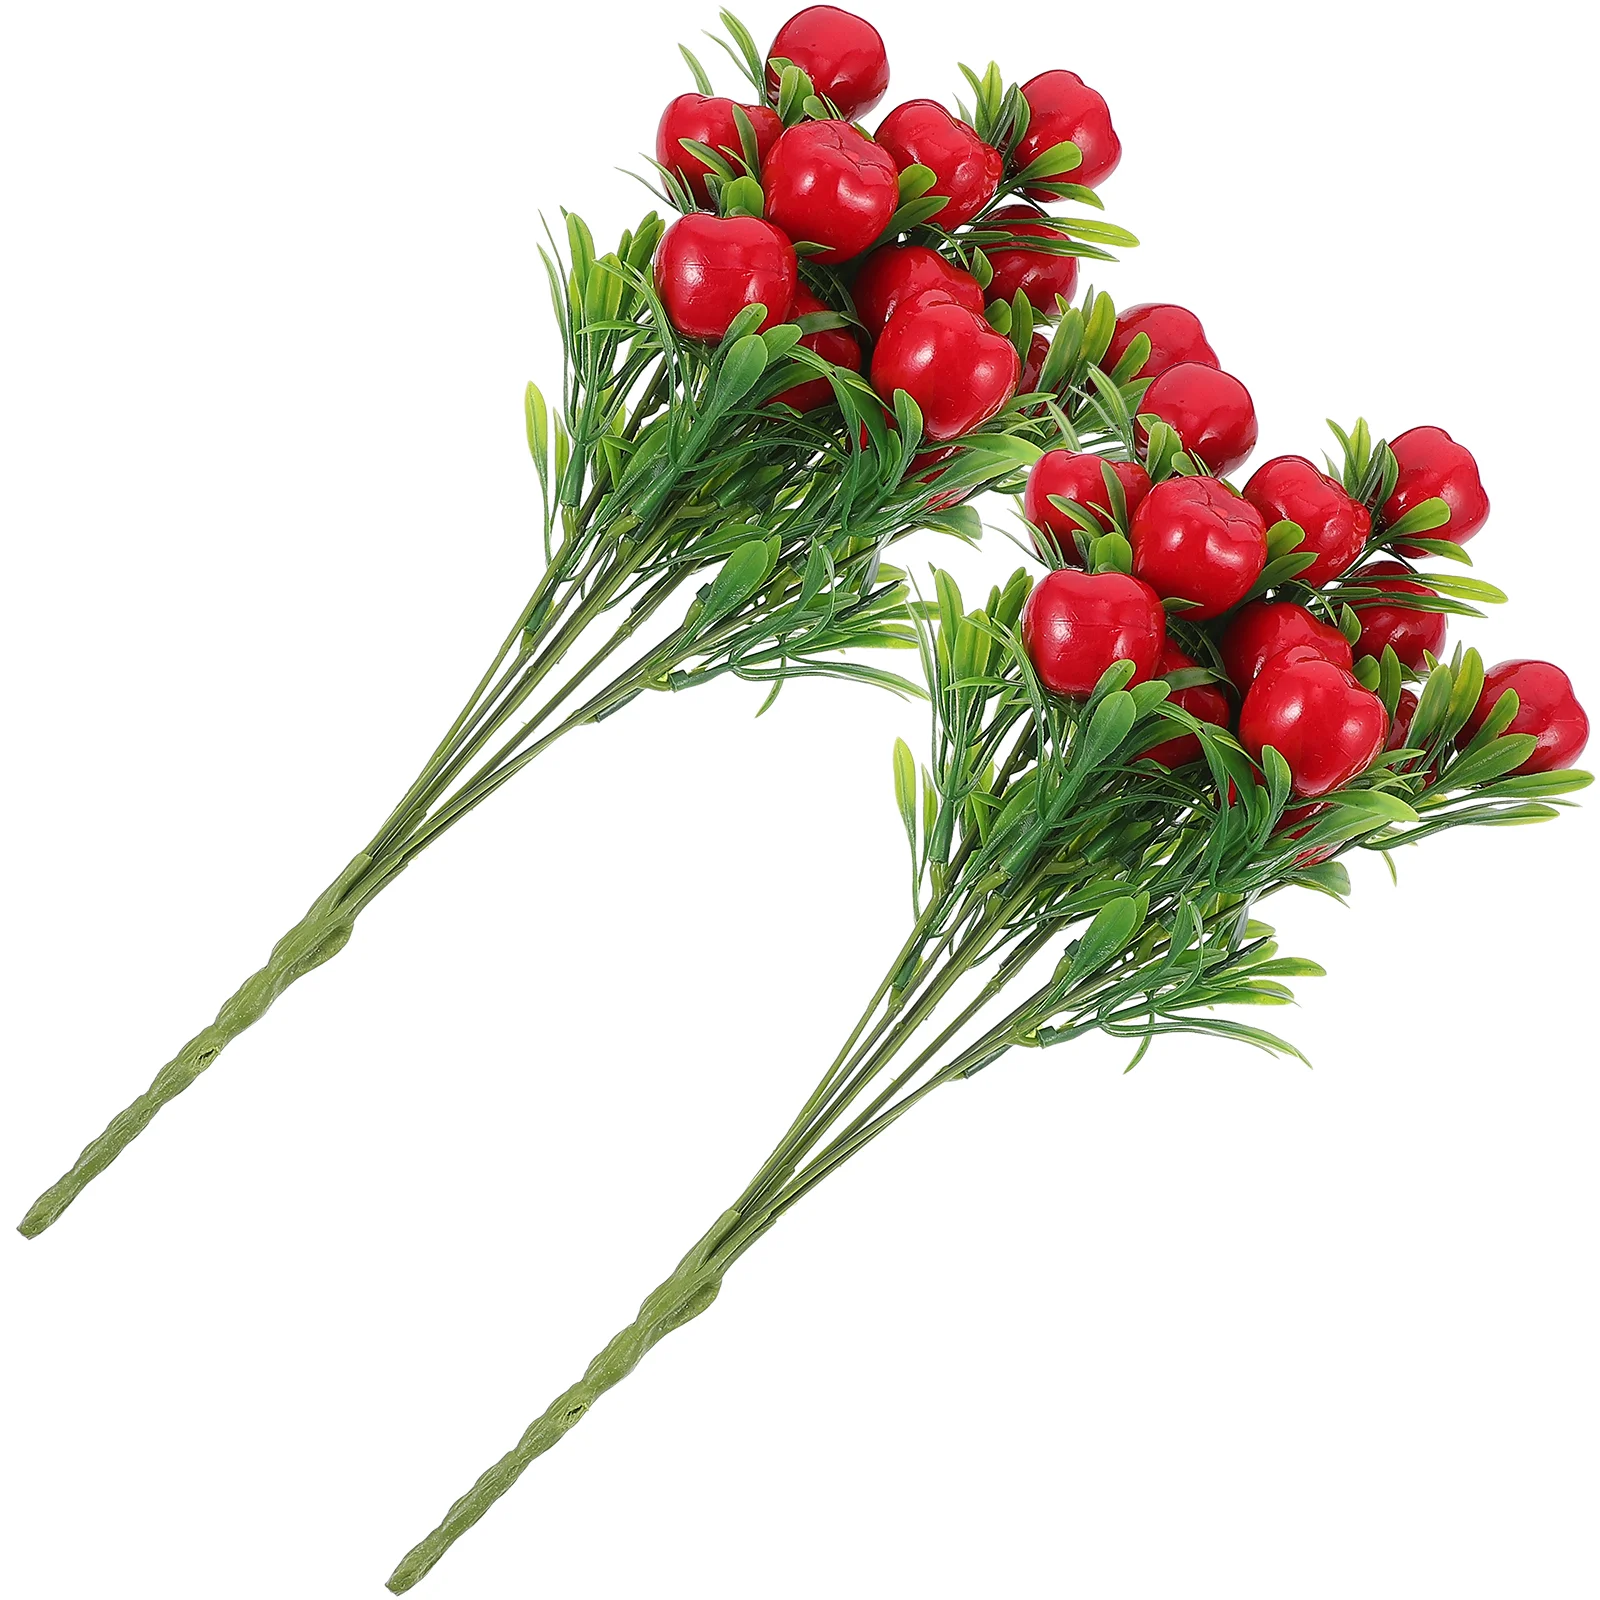 

2 Pcs Strawberry Decorations Flower Branch Simulated Apples Branches Artificial Faux Fruits Tree Stem Plastic Lifelike